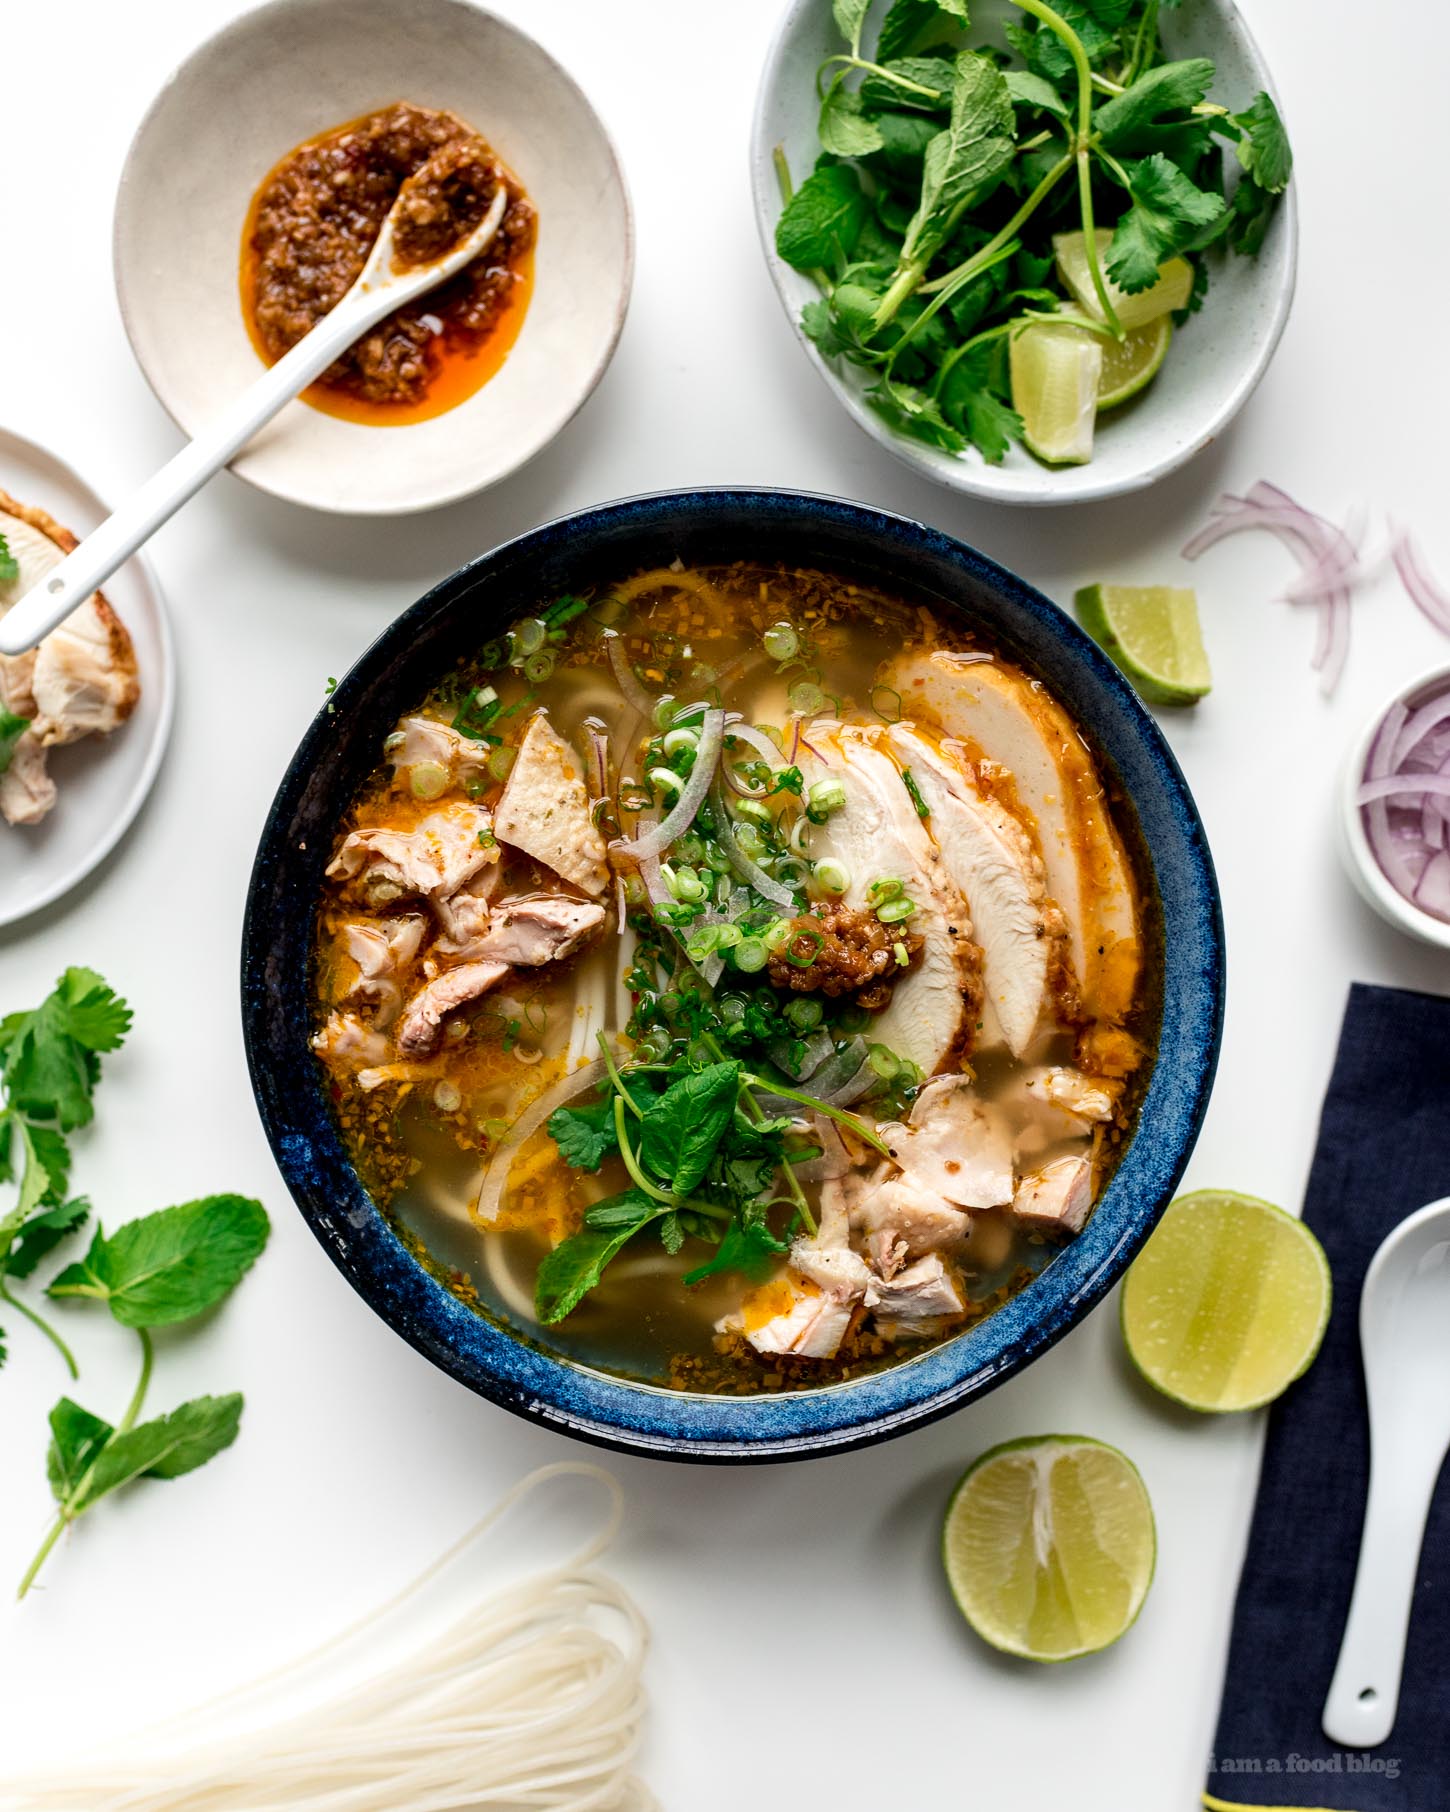 Hue Style Spicy Turkey Vermicelli Noodle Soup Recipe | www.iamafoodblog.com